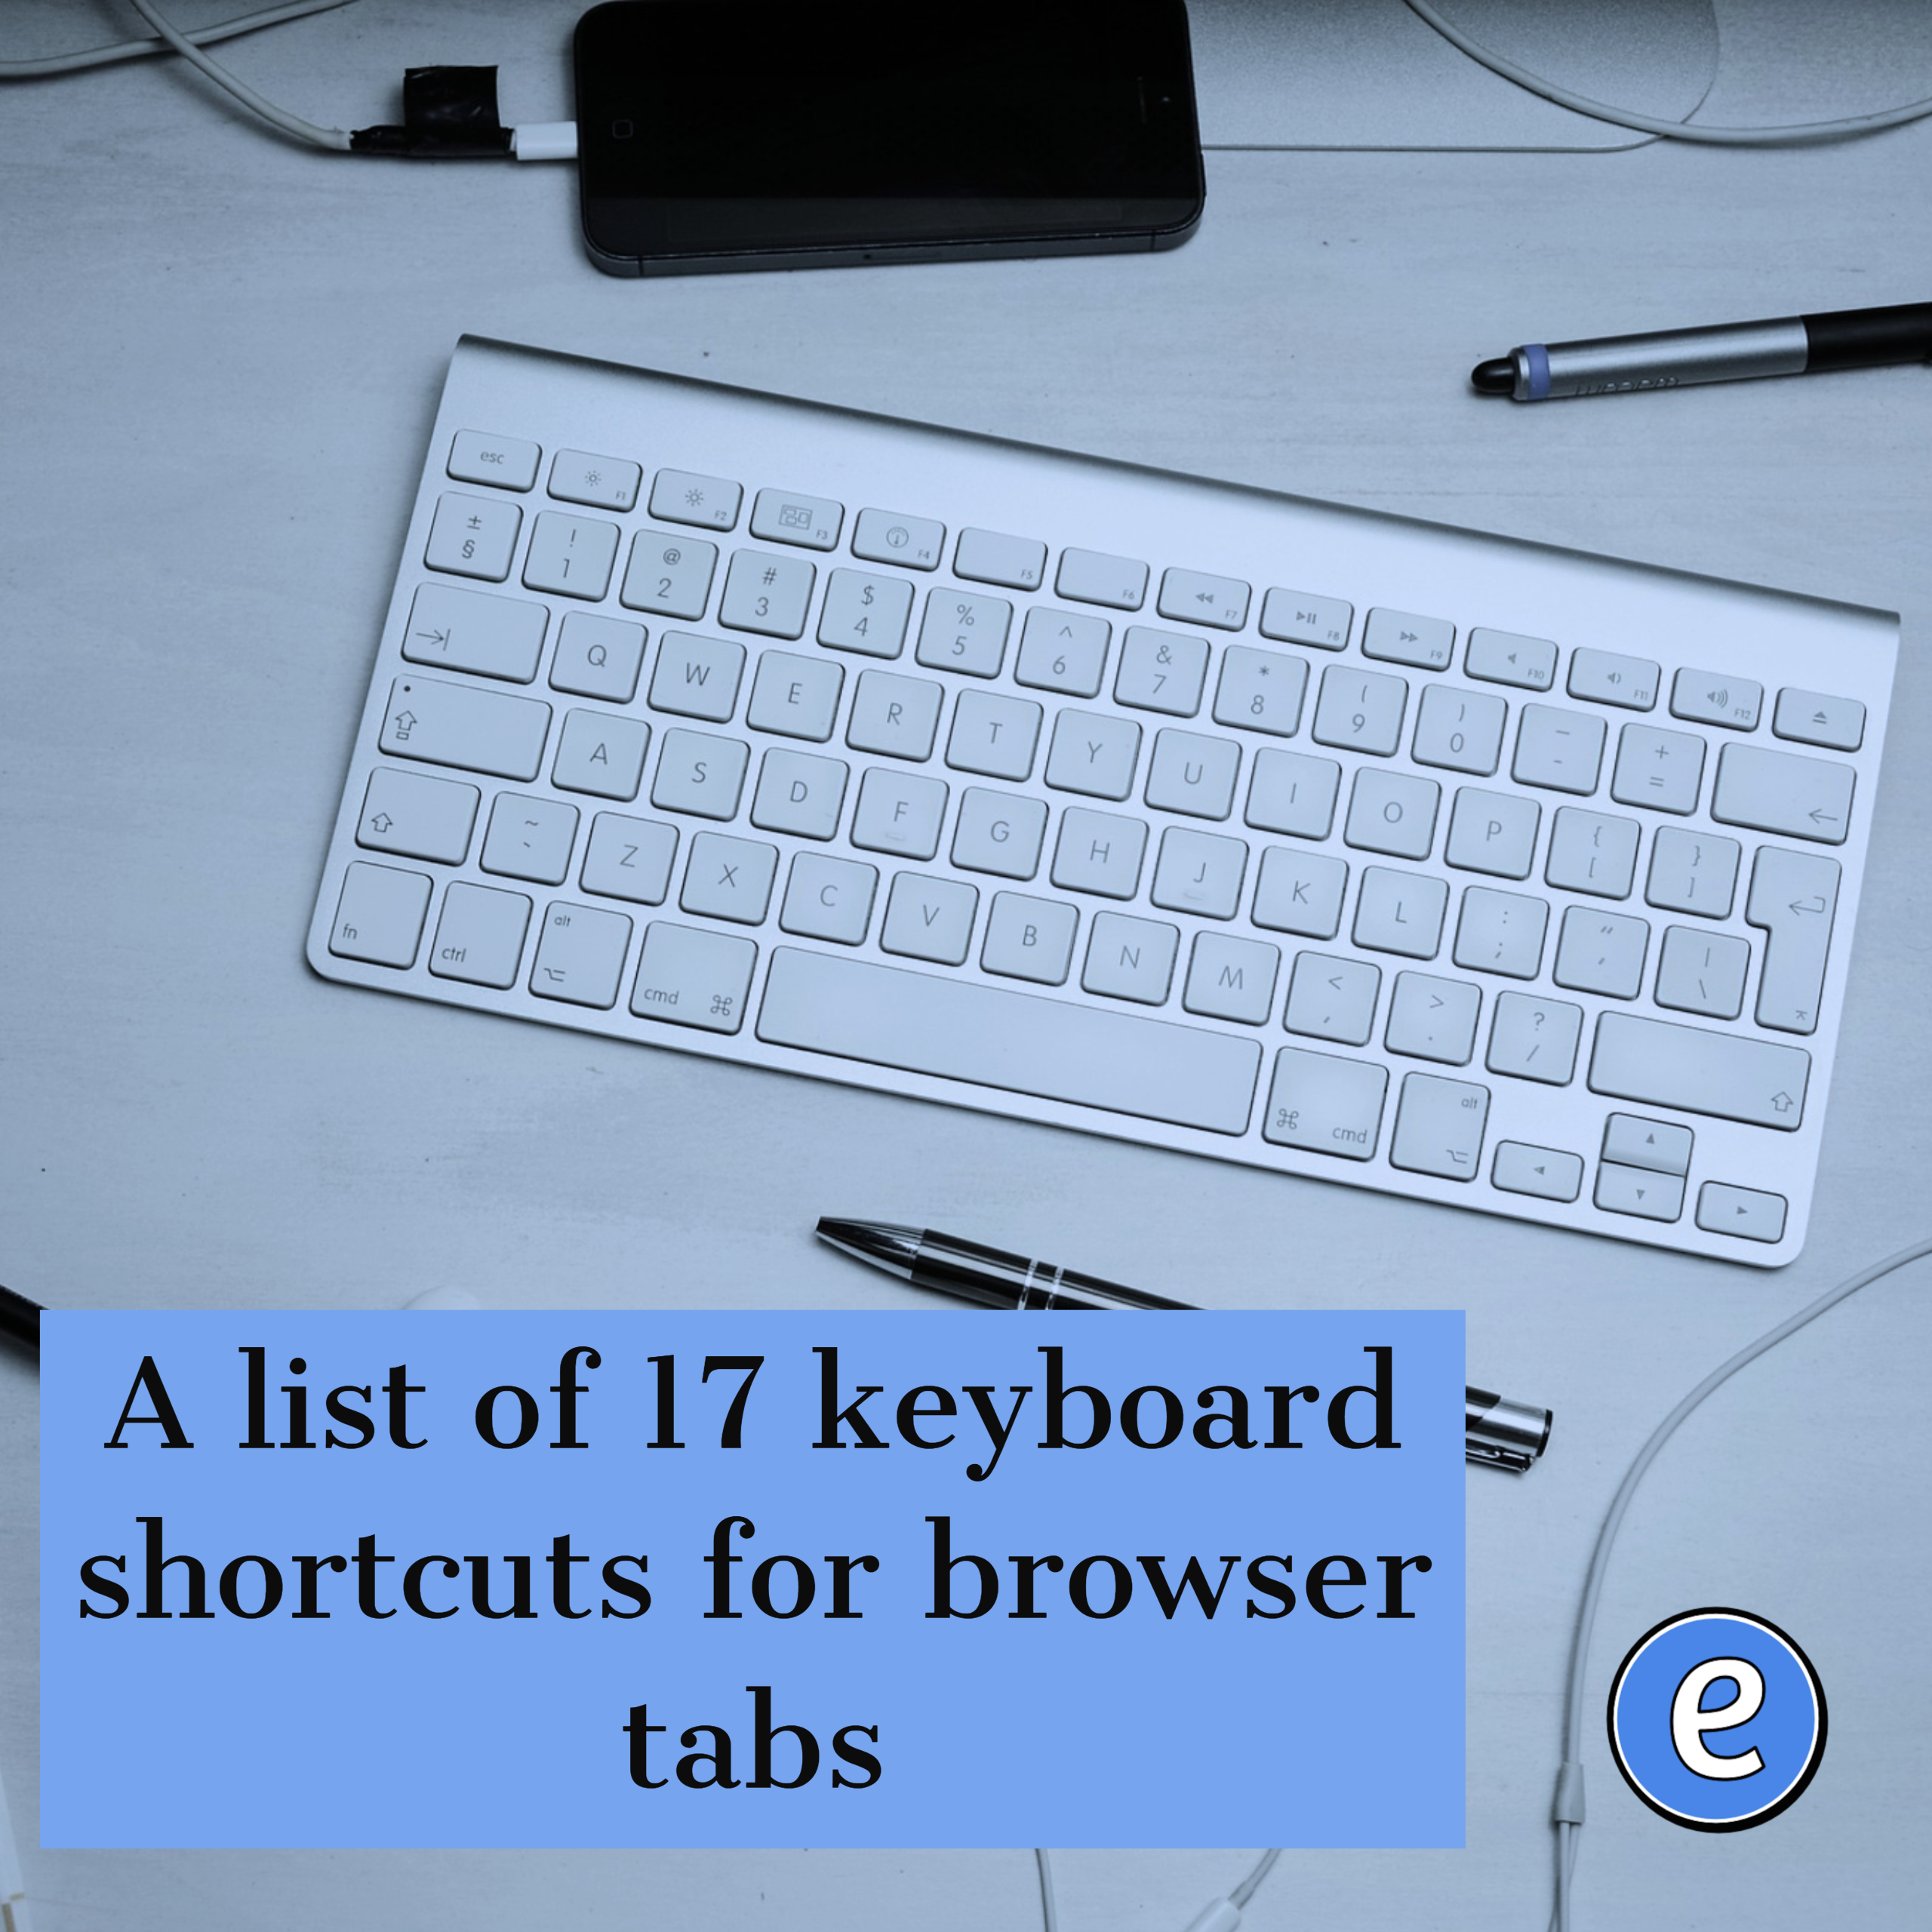 A list of 17 keyboard shortcuts for browser tabs